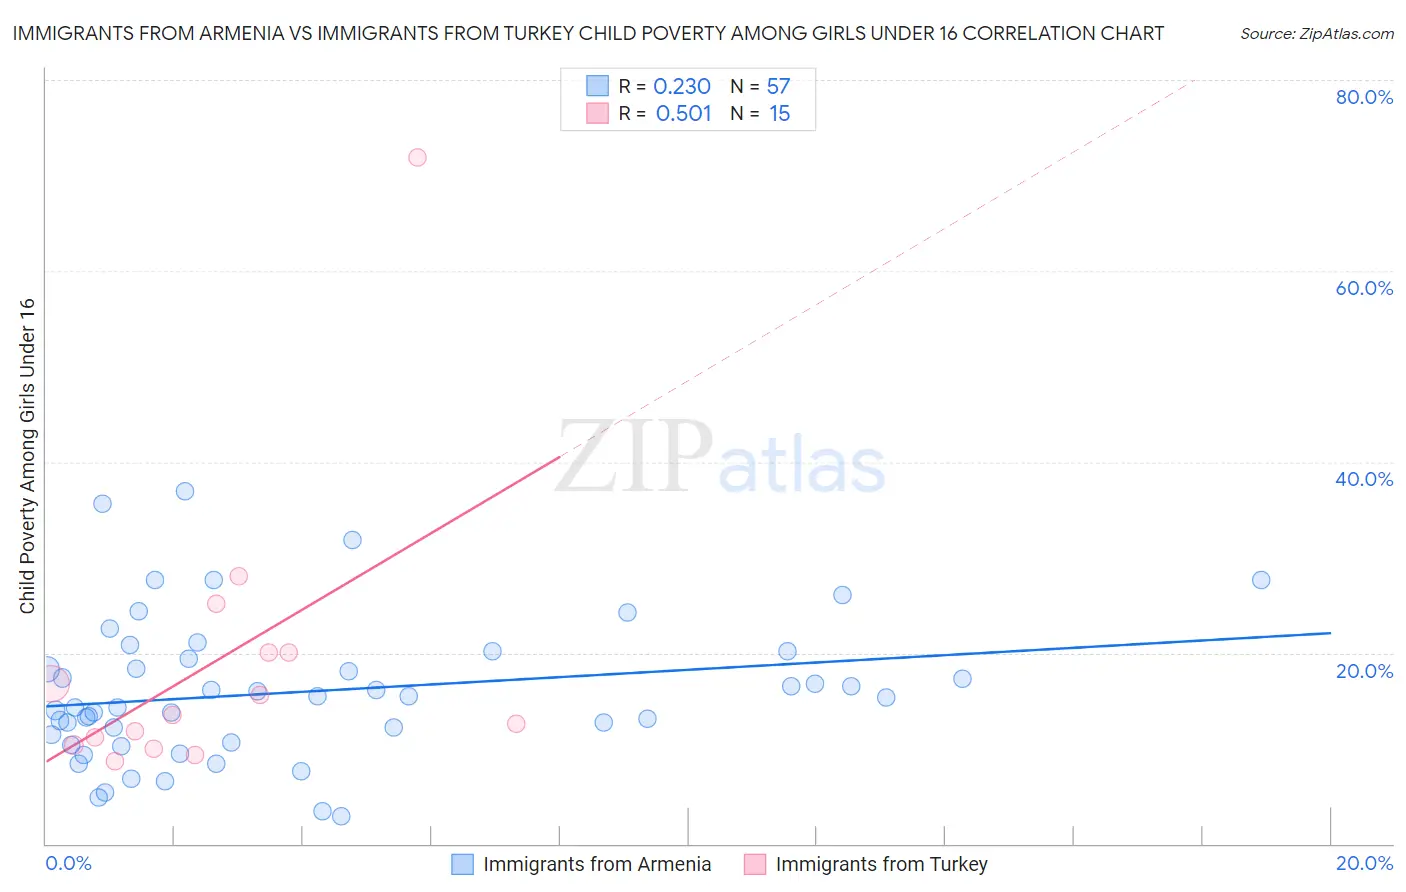 Immigrants from Armenia vs Immigrants from Turkey Child Poverty Among Girls Under 16